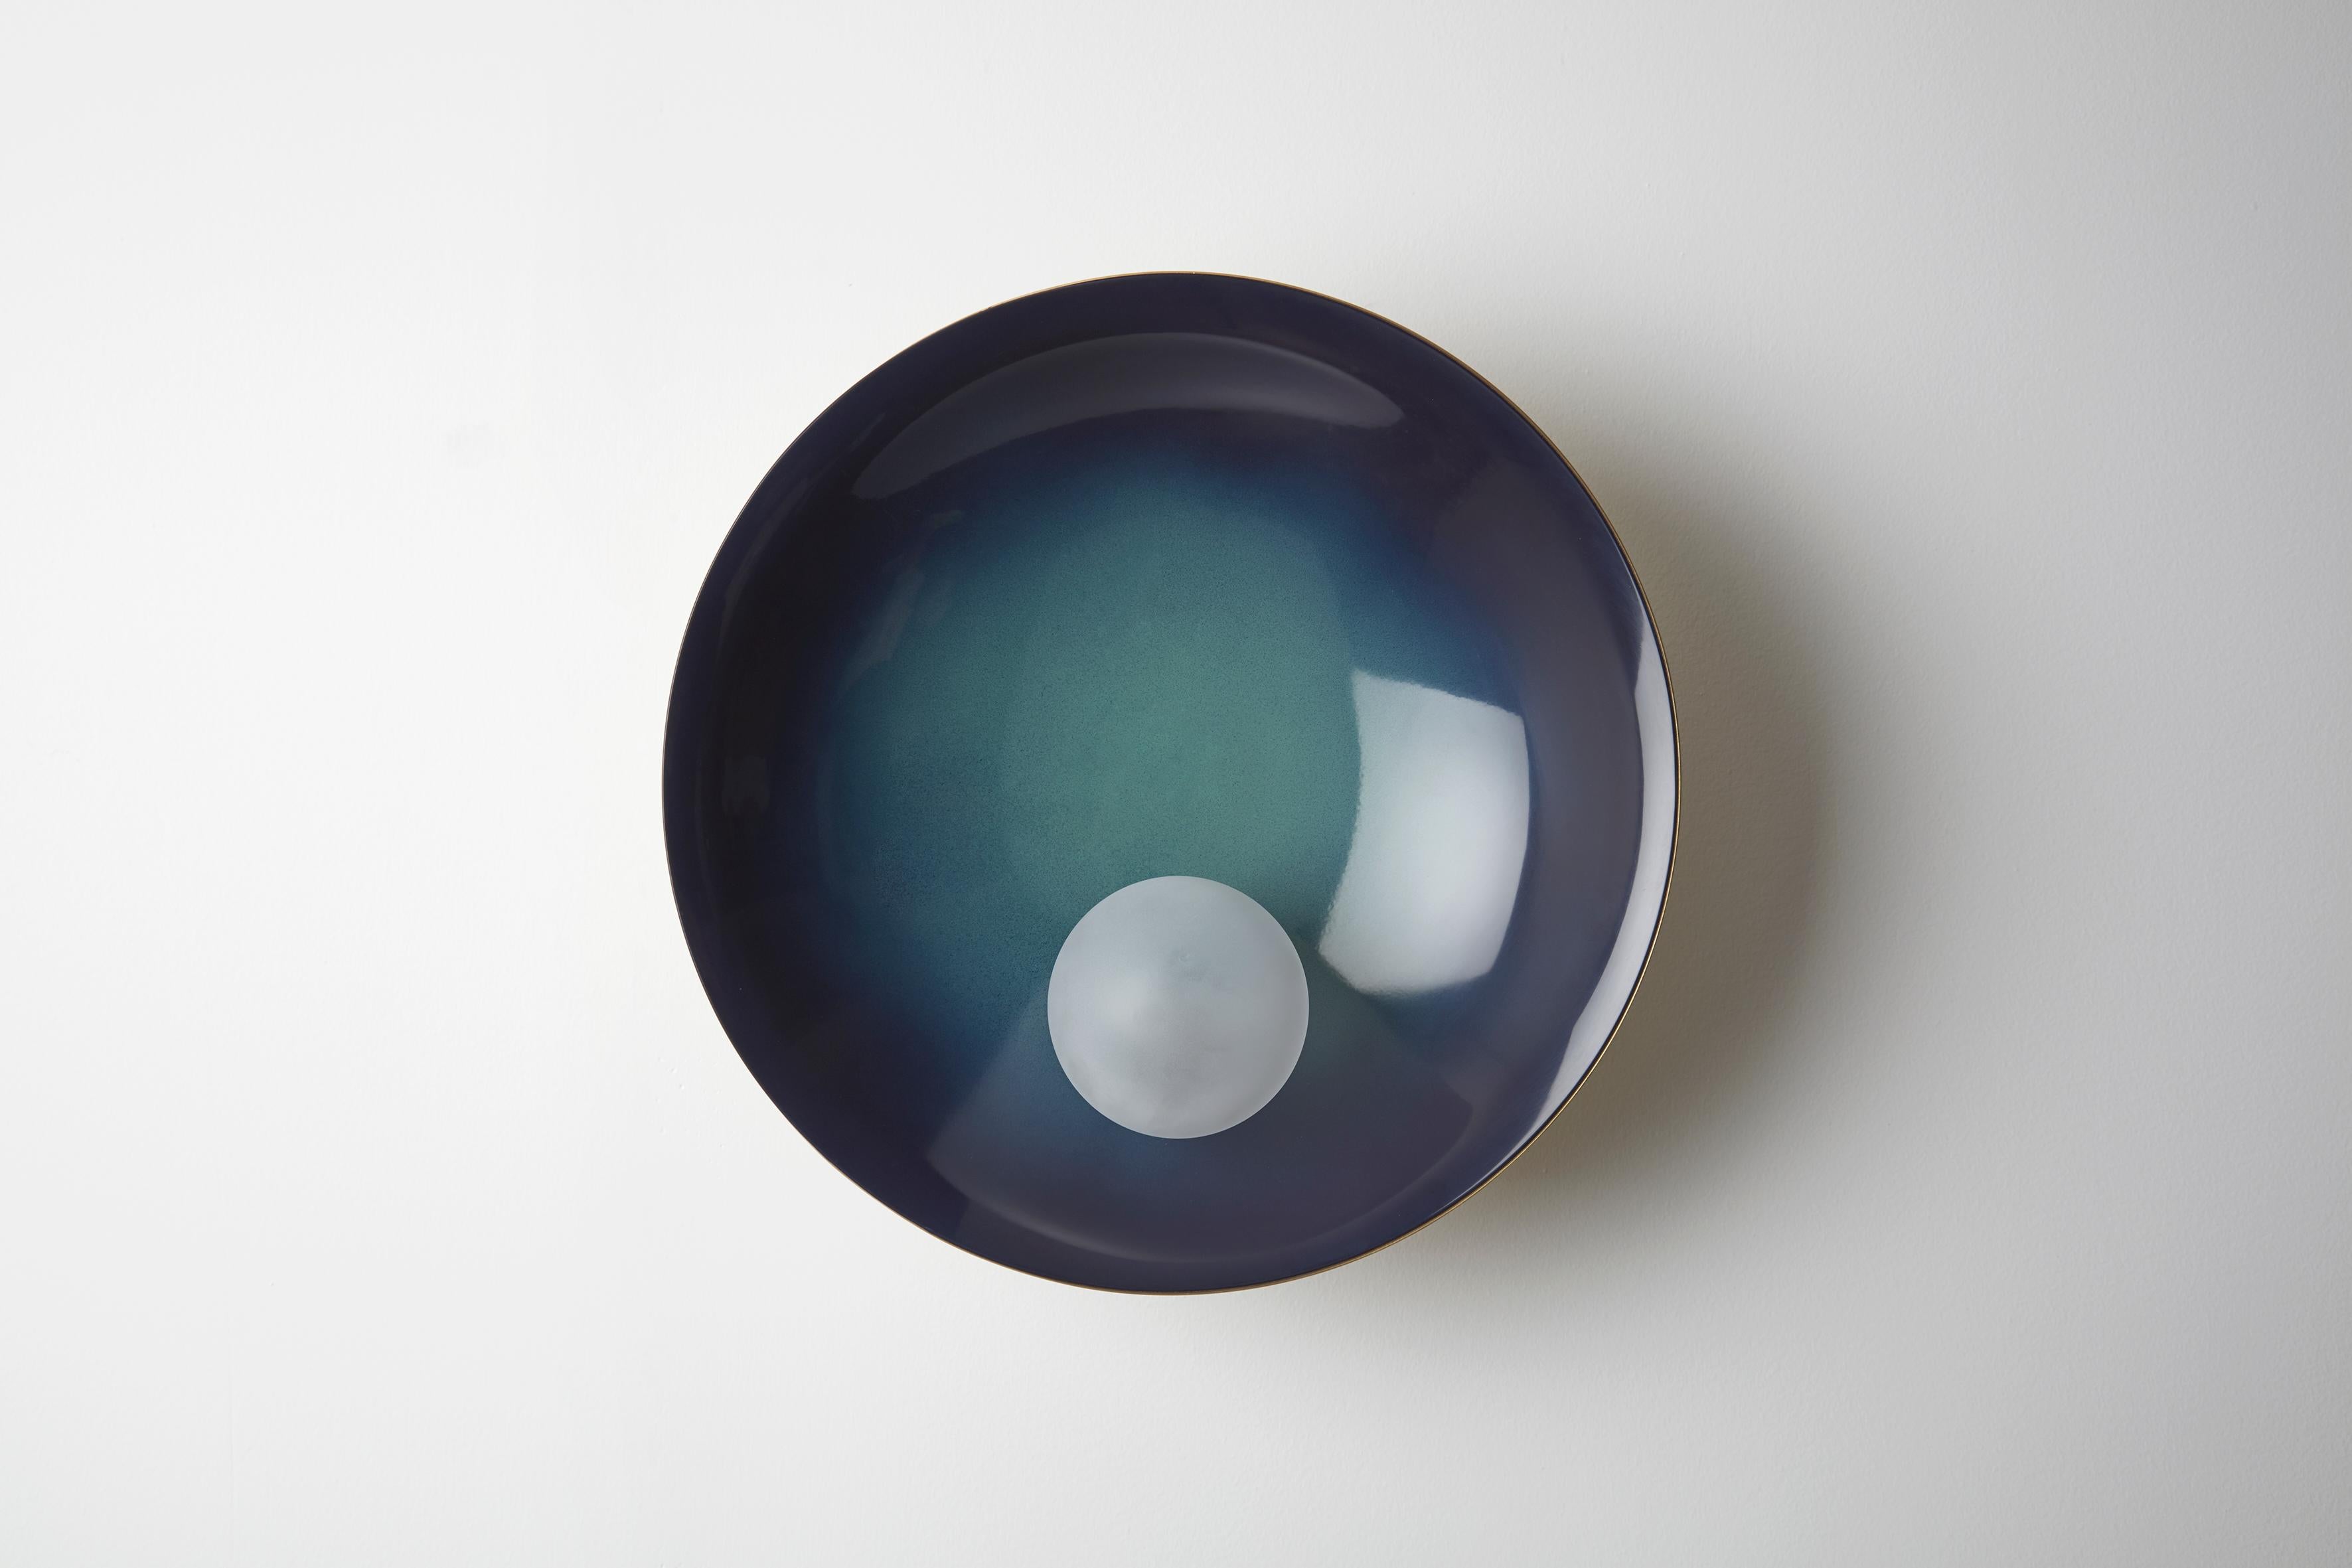 Oyster wall-ceiling mounted midnight blue, - Carla Baz
Dimensions: ø 40 x D 18 
Weight: 3.5 kg
Material: Brass, blown satin glass globes

Oyster is a series of sculptural lighting pieces that were developed in 2016. Wanting to explore the IDEA